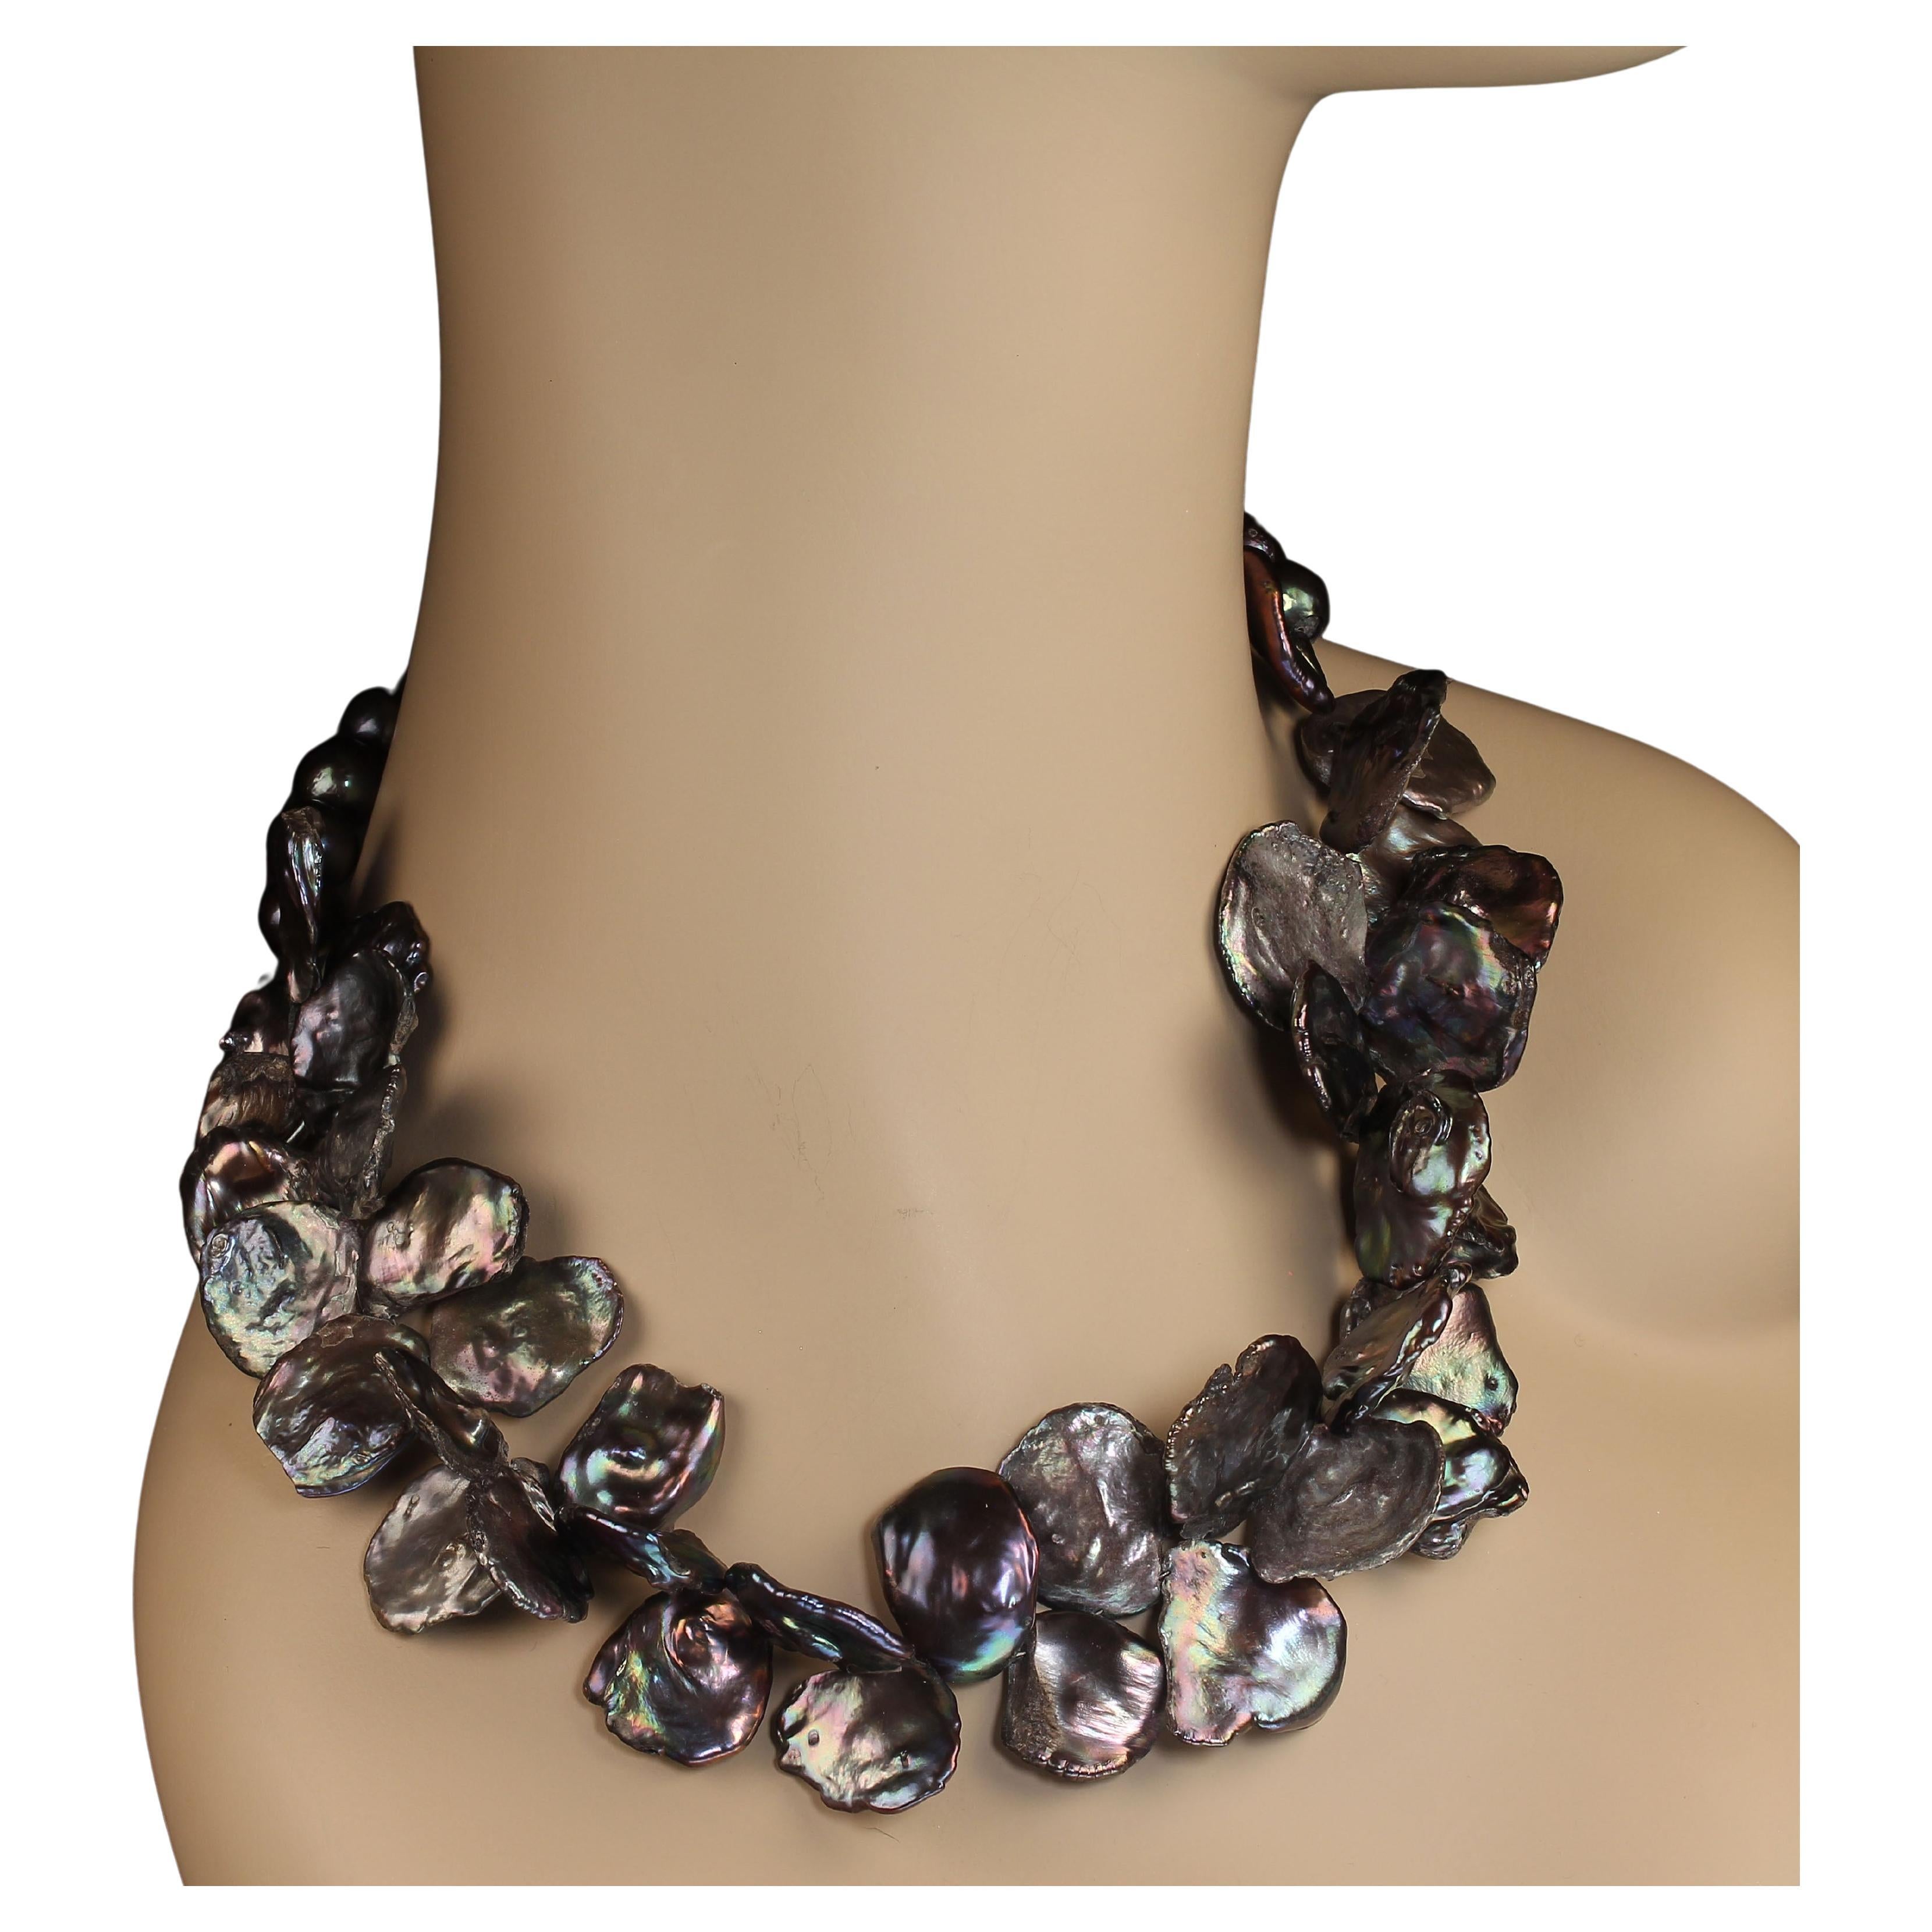 Fluttering petals of iridescent peacock pearls necklace.  This expandable necklace is 17-18 inches for a comfortable fit.  The gorgeous pearls flash iridescent shades of purple, green, pink, and blue.  MN2316